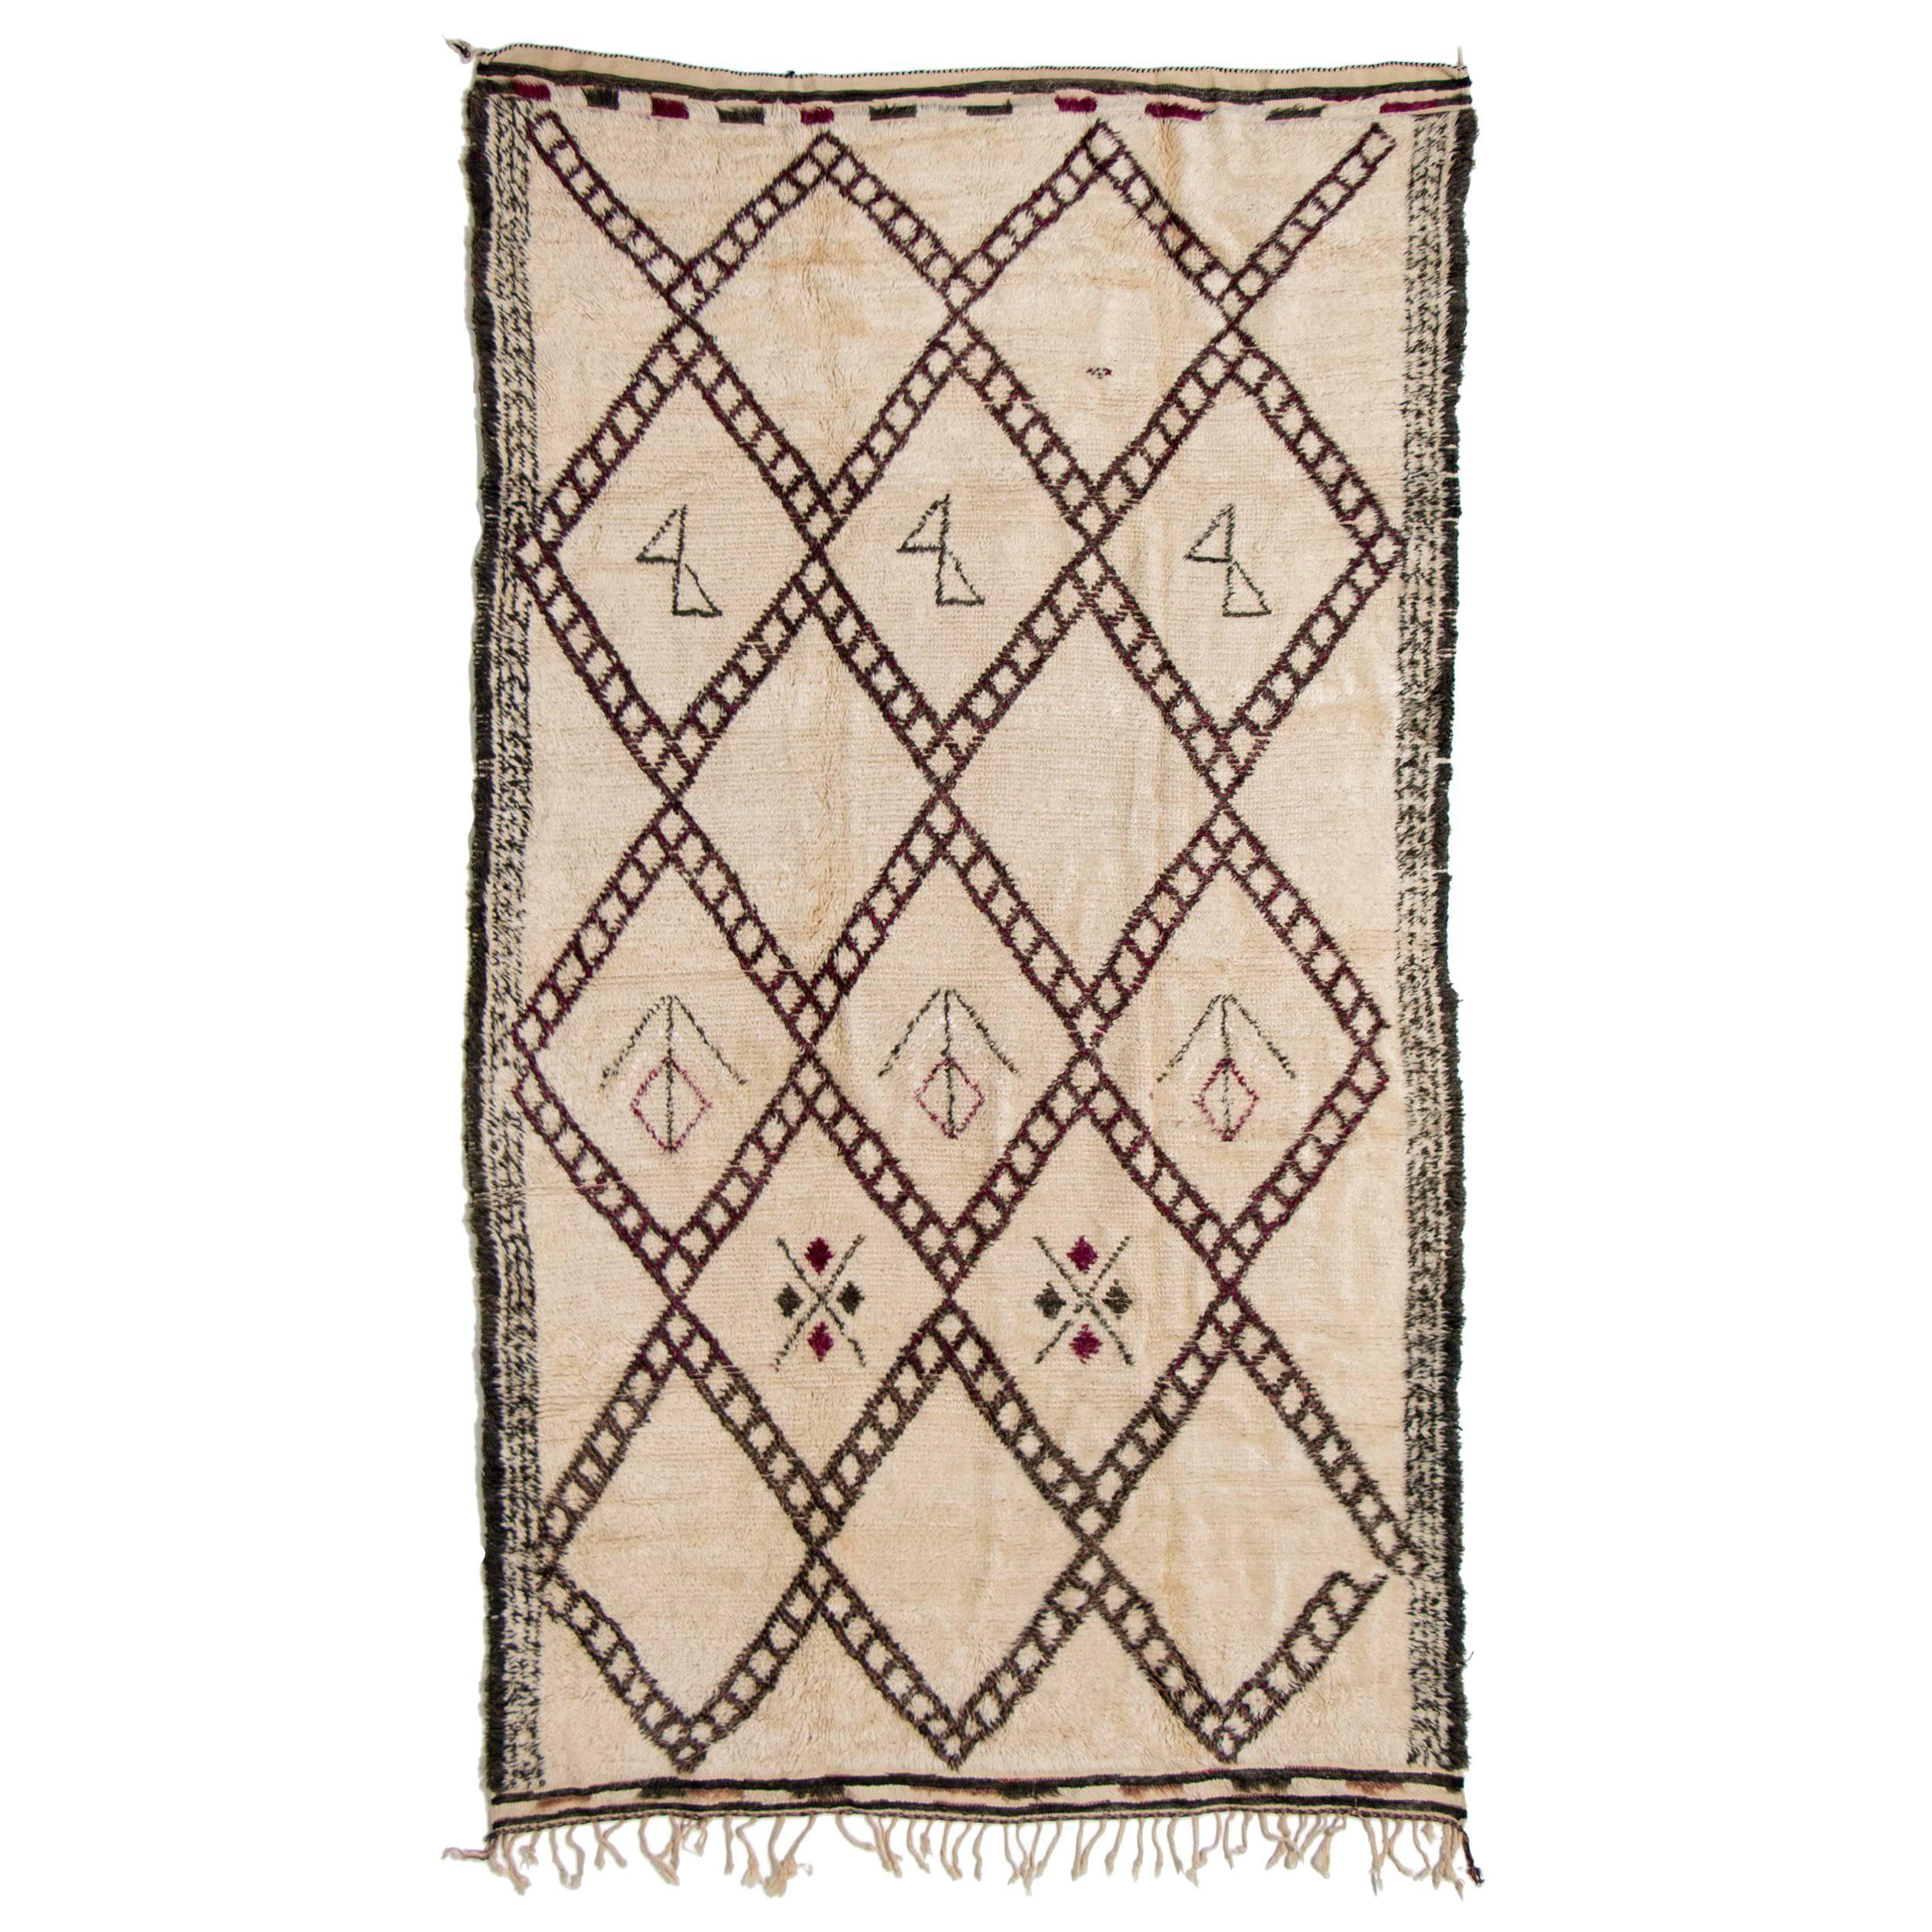 Vintage Handwoven Rug by the Beni Ourain Tribe For Sale